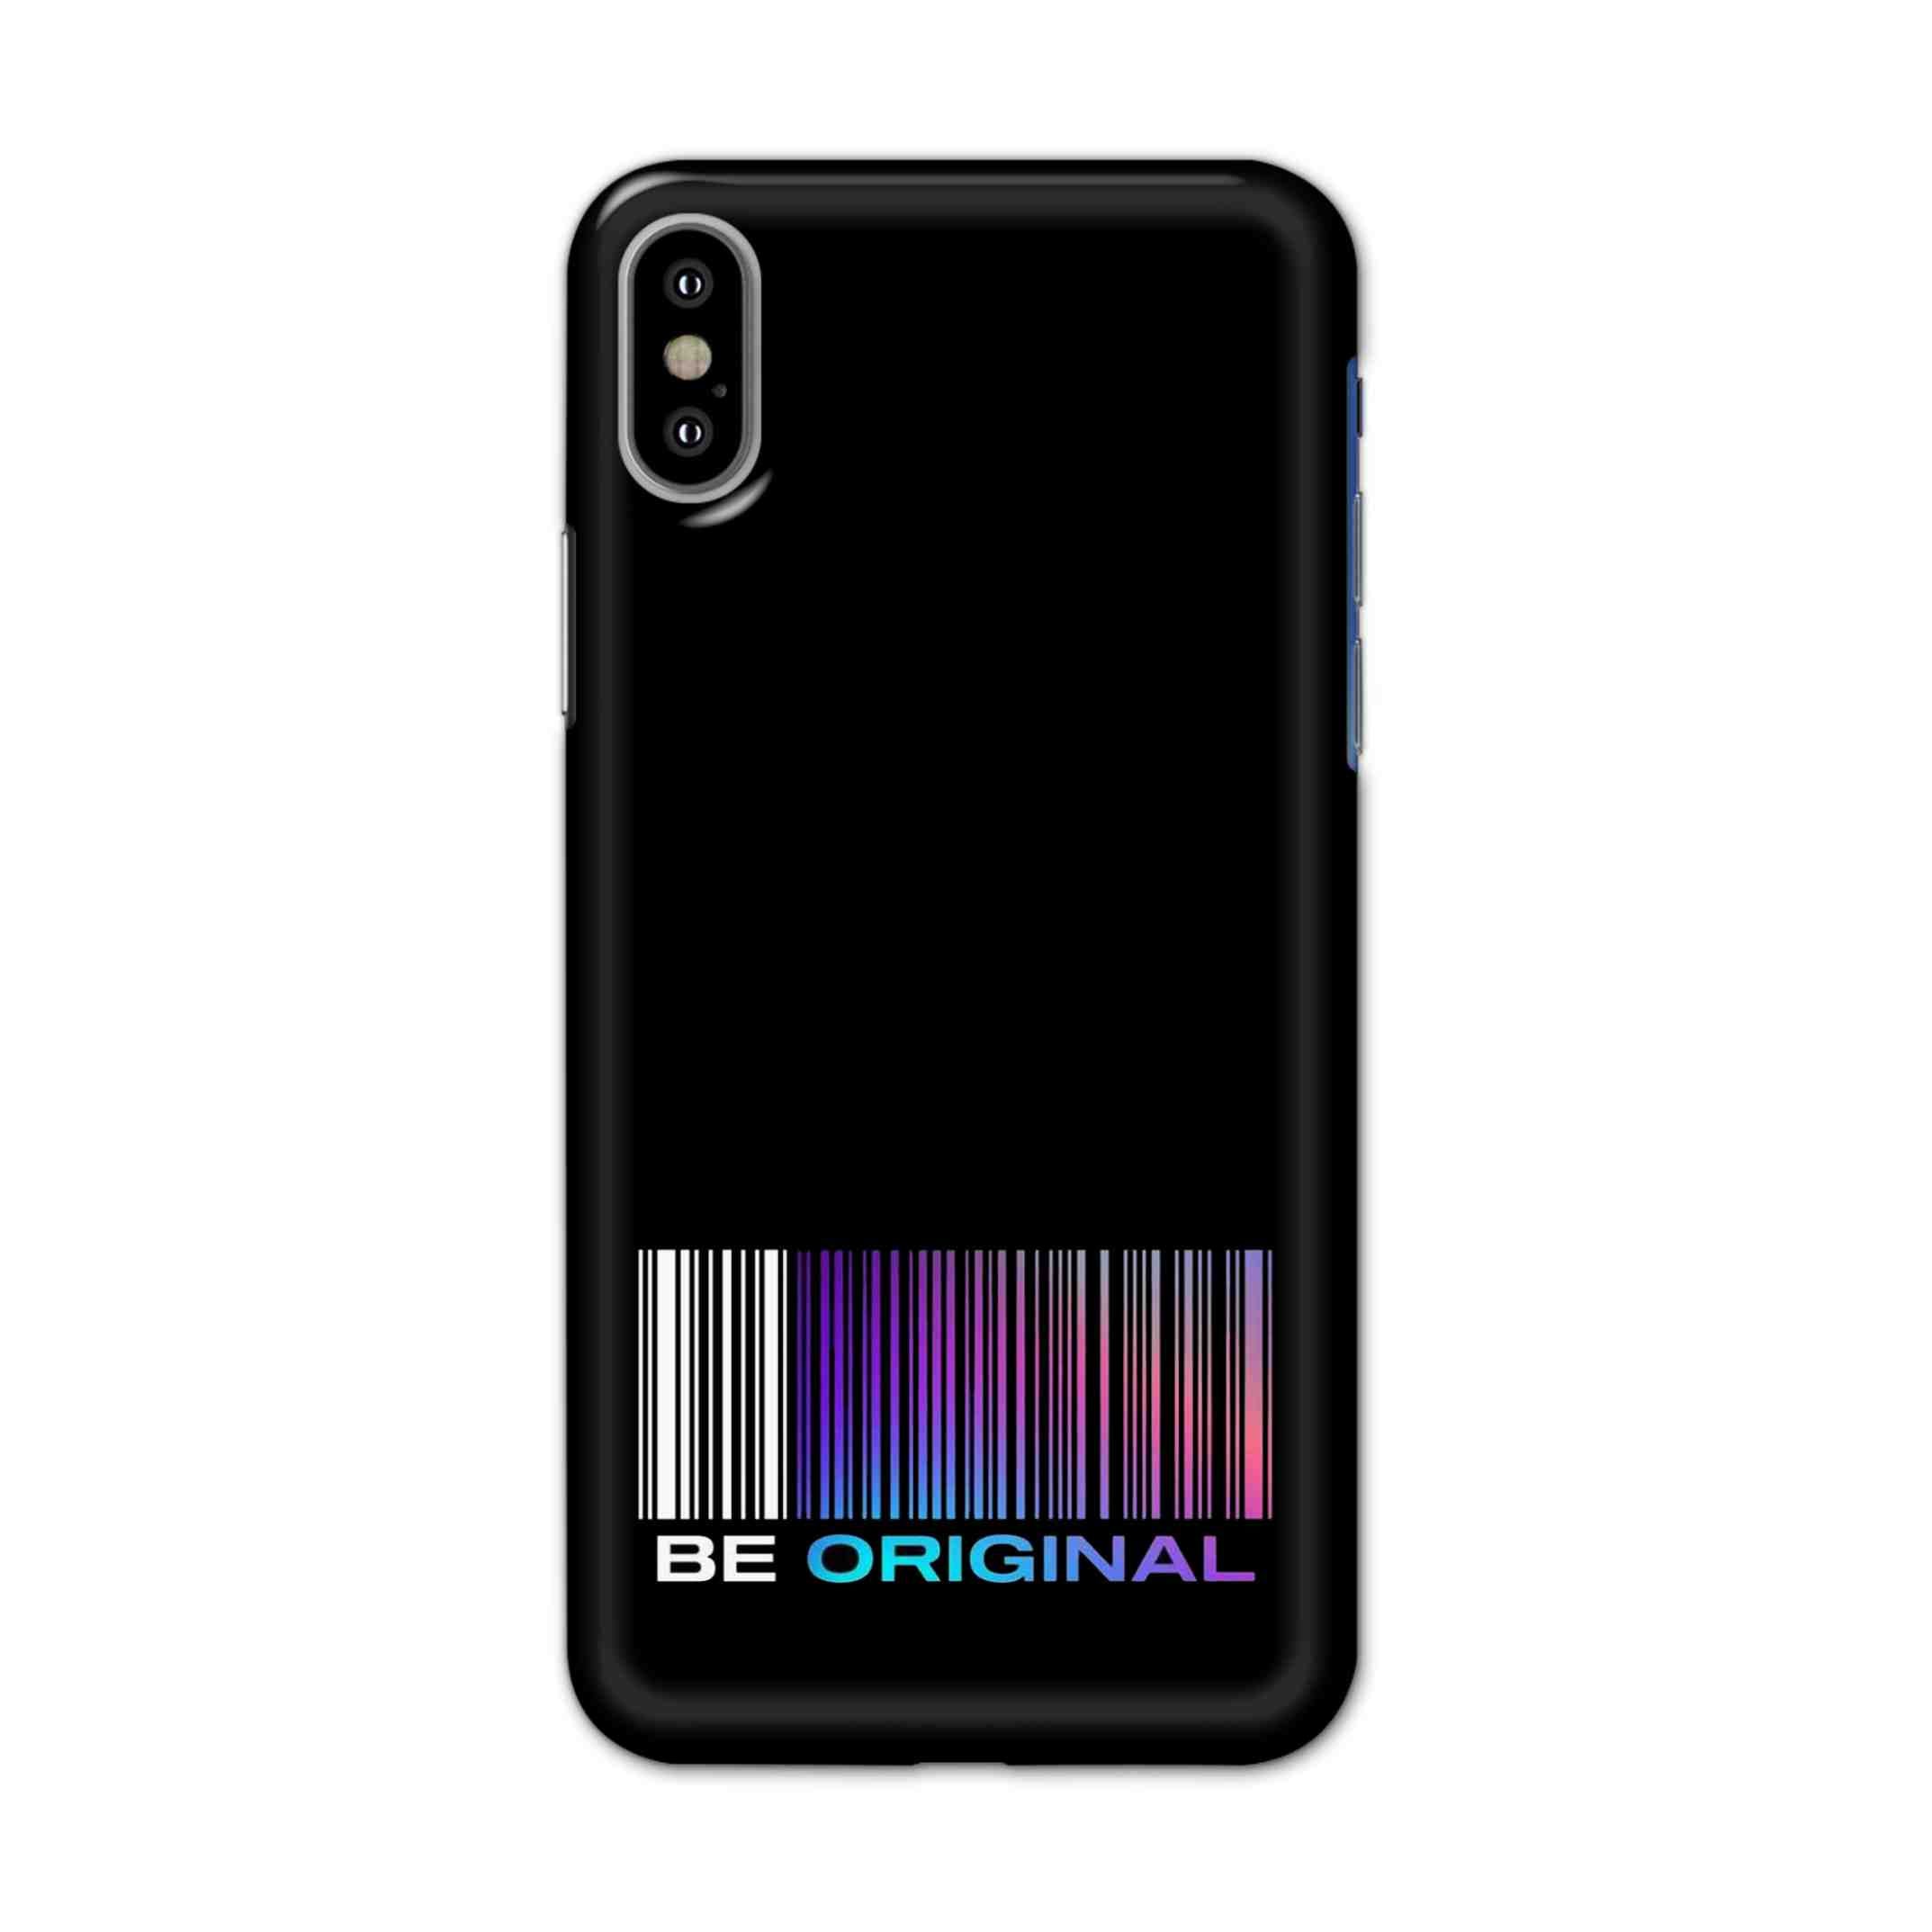 Buy Be Original Hard Back Mobile Phone Case/Cover For iPhone X Online